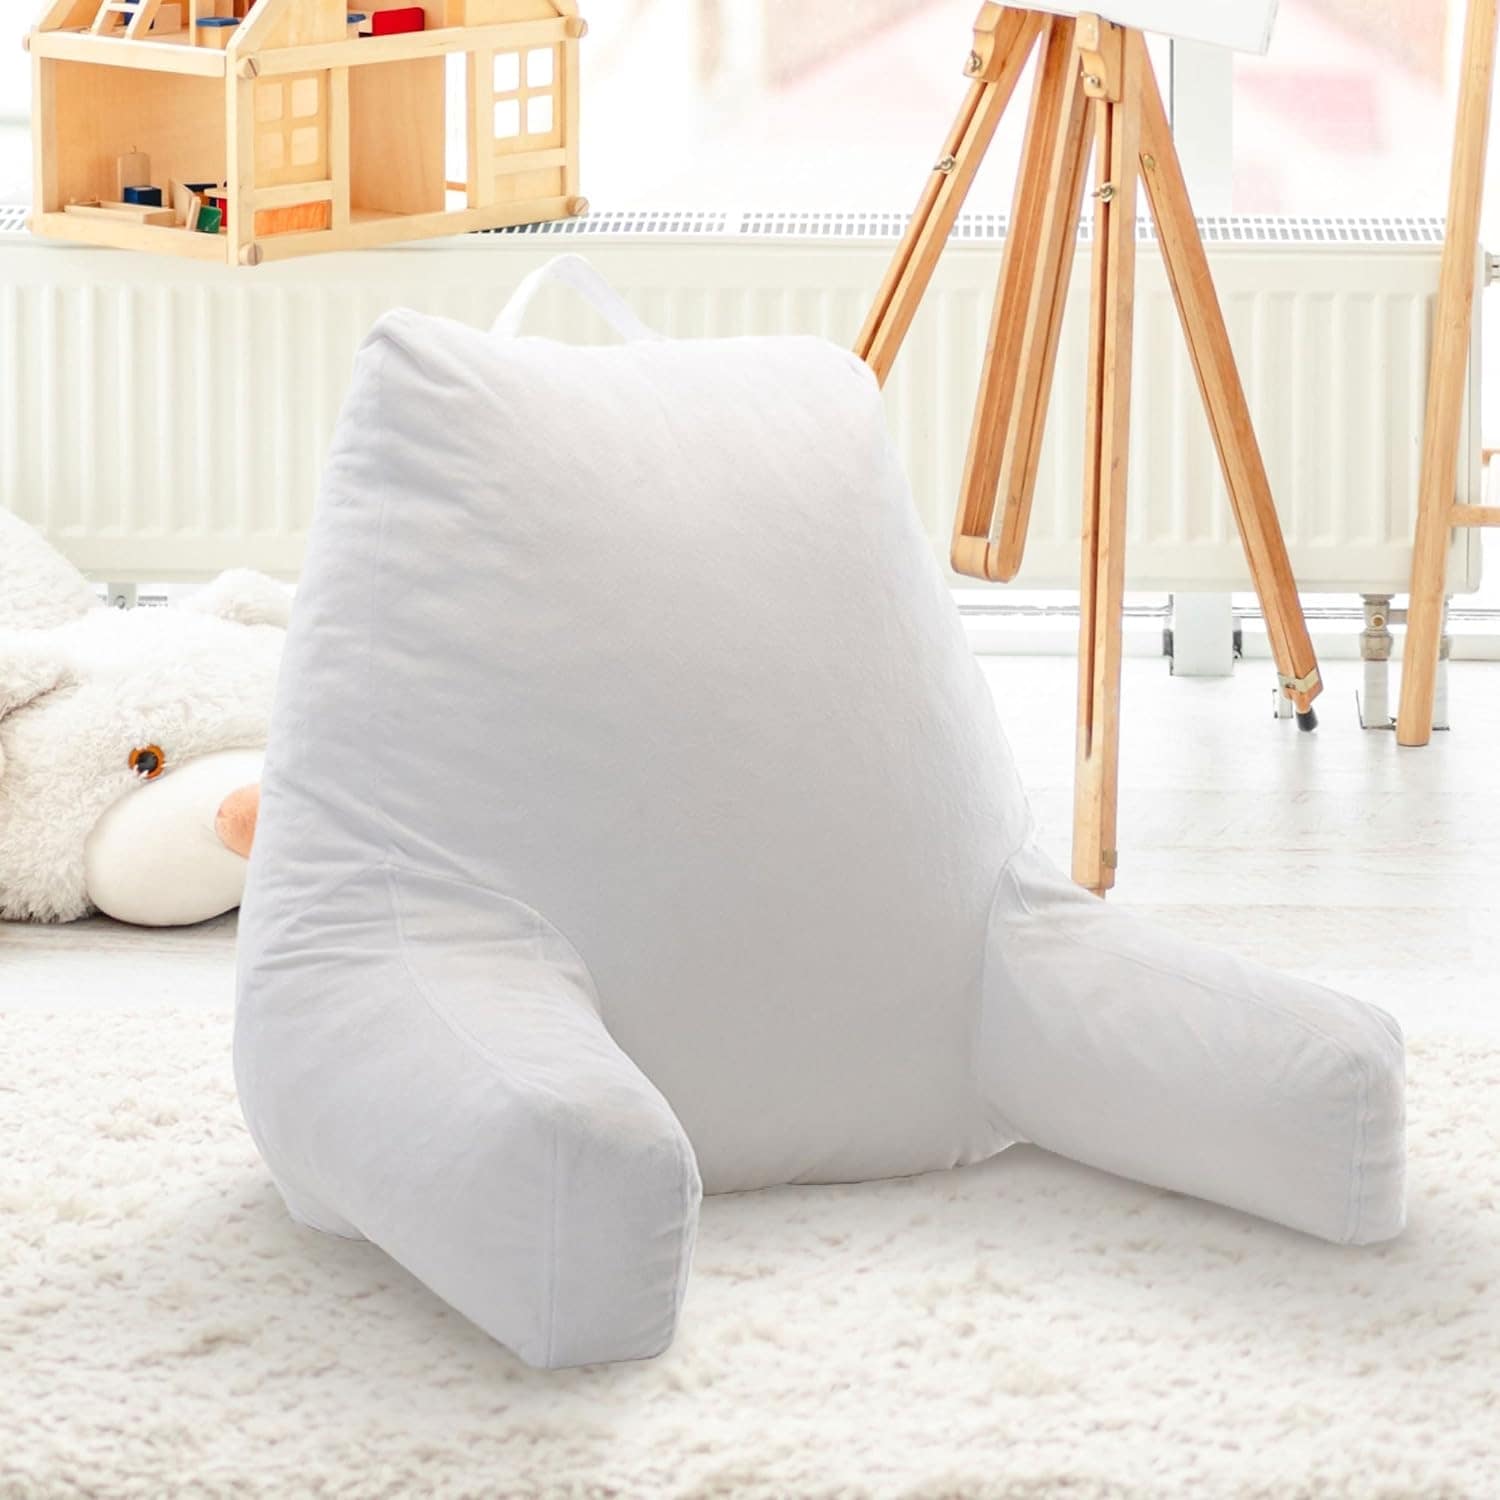 https://ak1.ostkcdn.com/images/products/is/images/direct/3b8327604011c9b990d3626b545d17b07e89c36b/Cheer-Collection-Kids-Memory-Foam-TV-And-Reading-Pillow.jpg